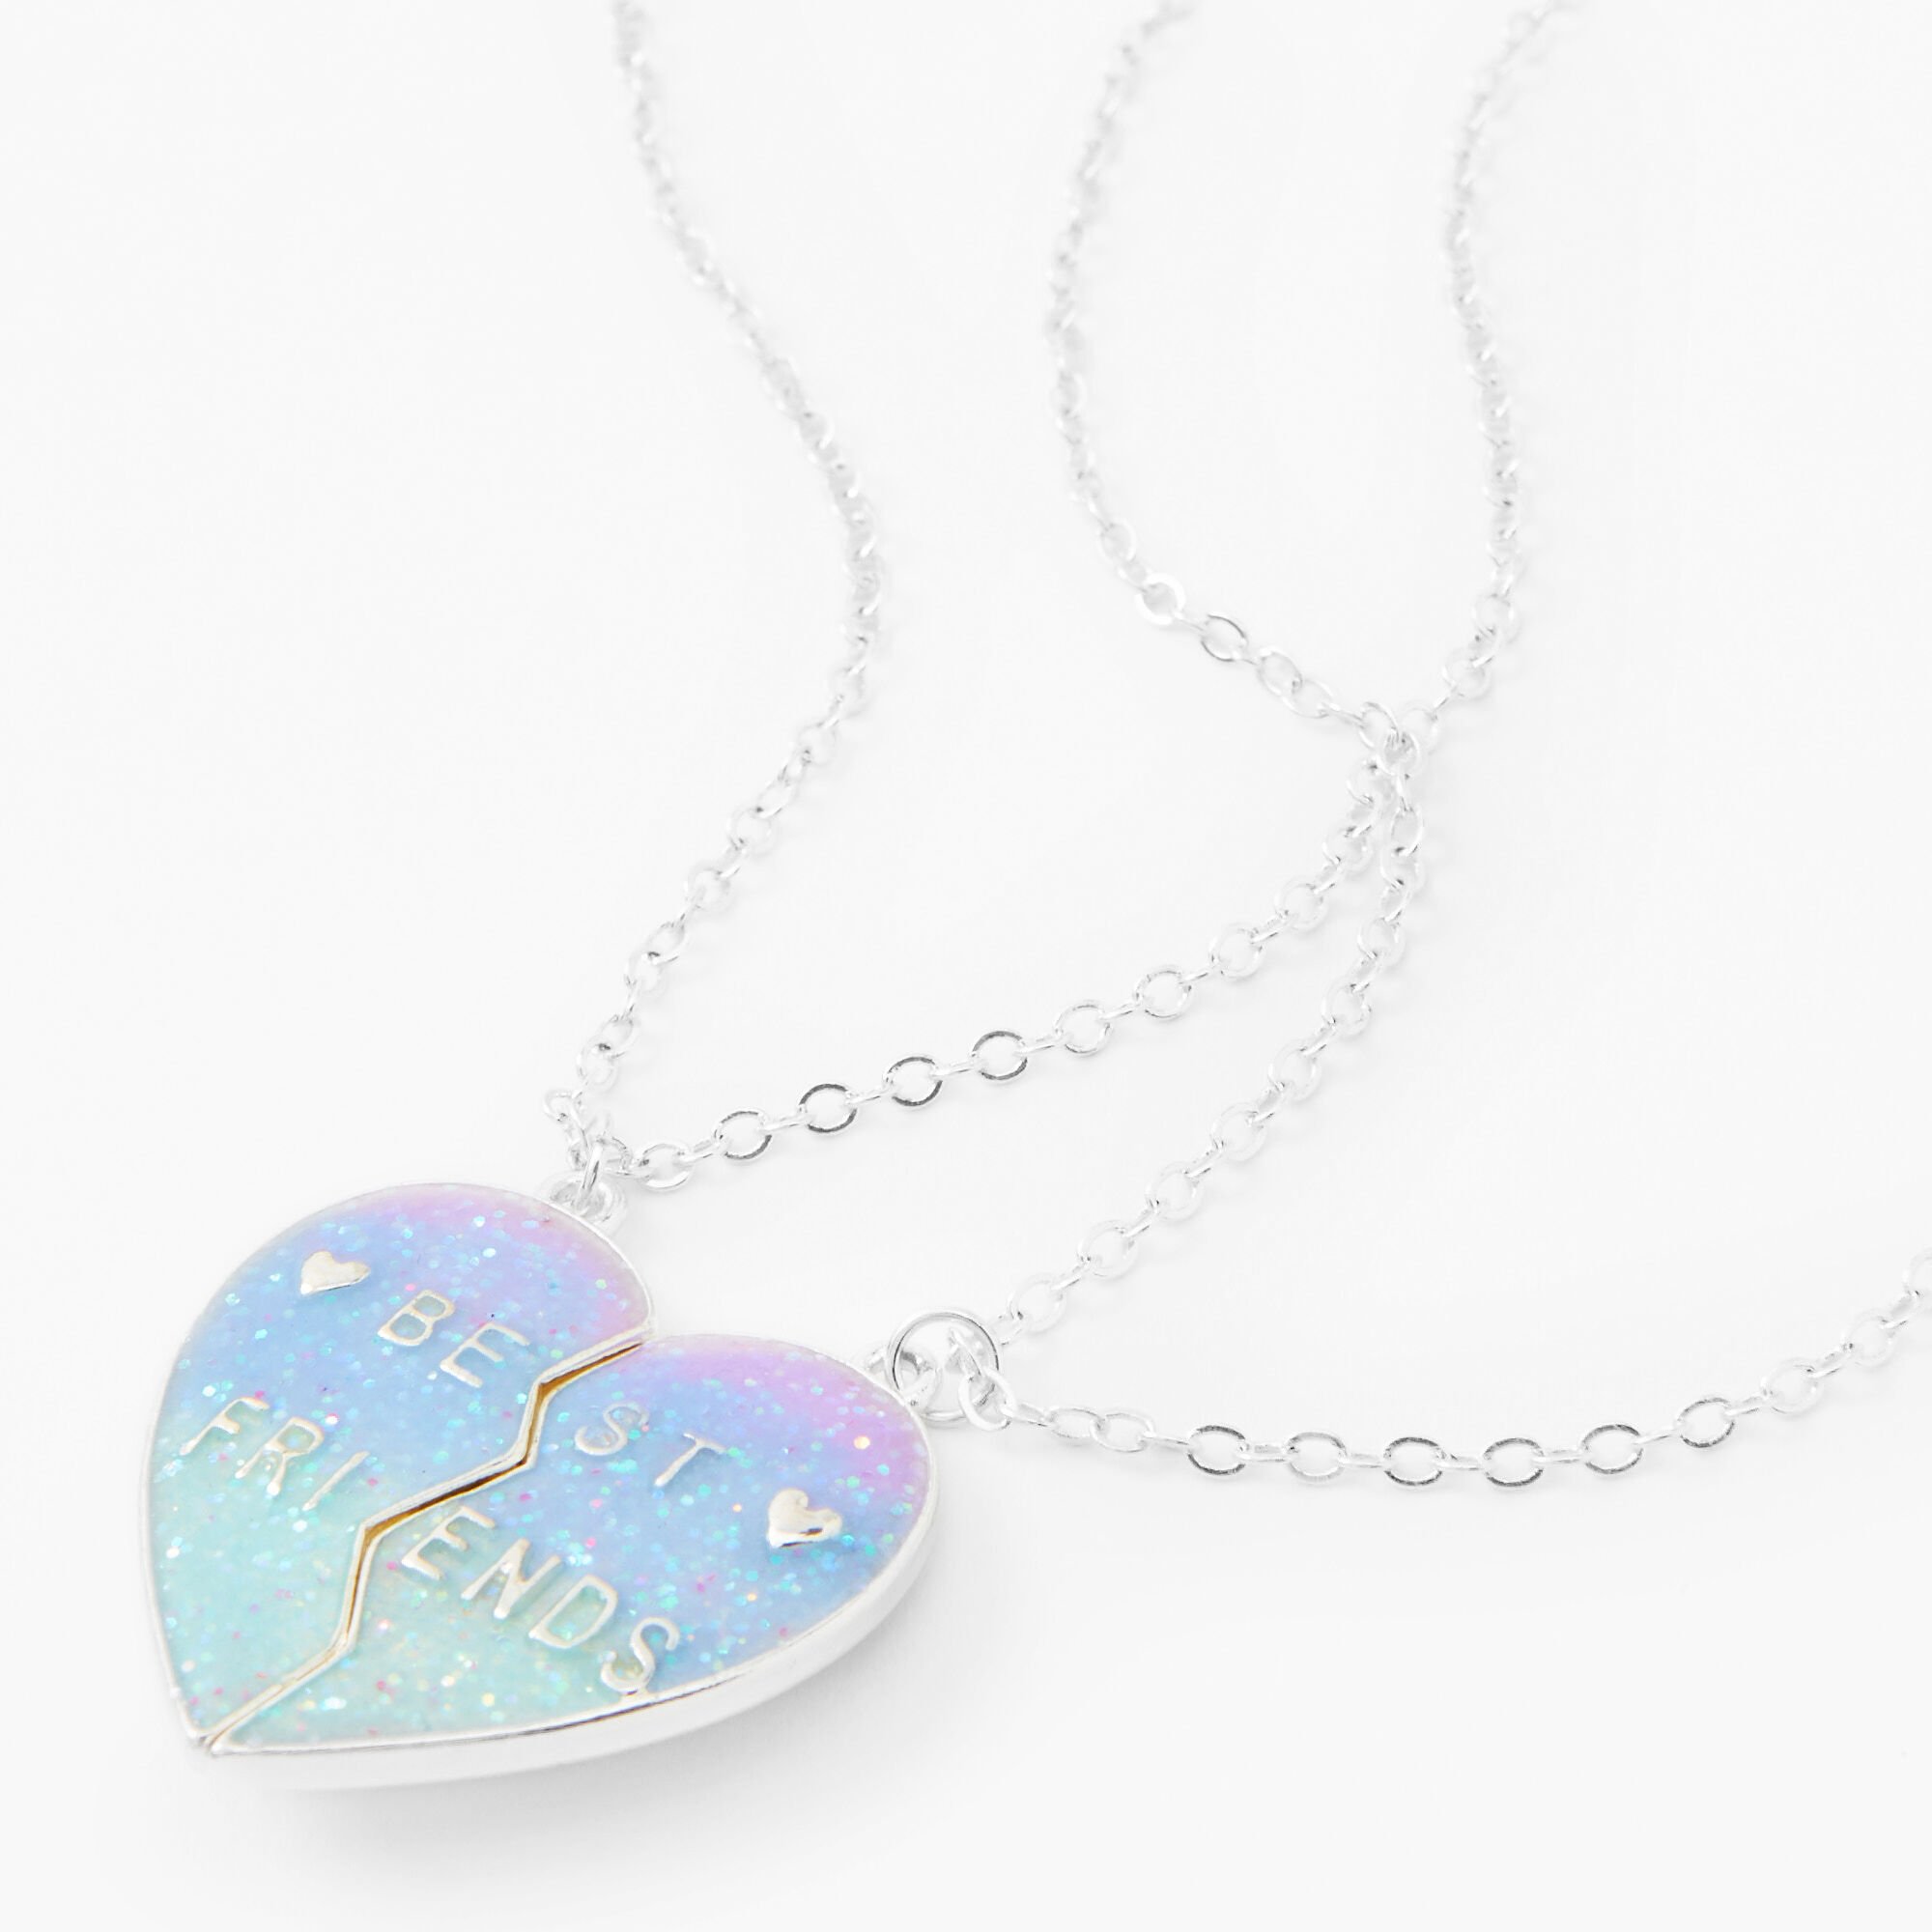 Trendy Enamel Silver Plated Rainbow Best Friends Friendship Necklace Friend  Kids Jewelry Gift Wholesale Price From Vecuteboutique, $0.58 | DHgate.Com